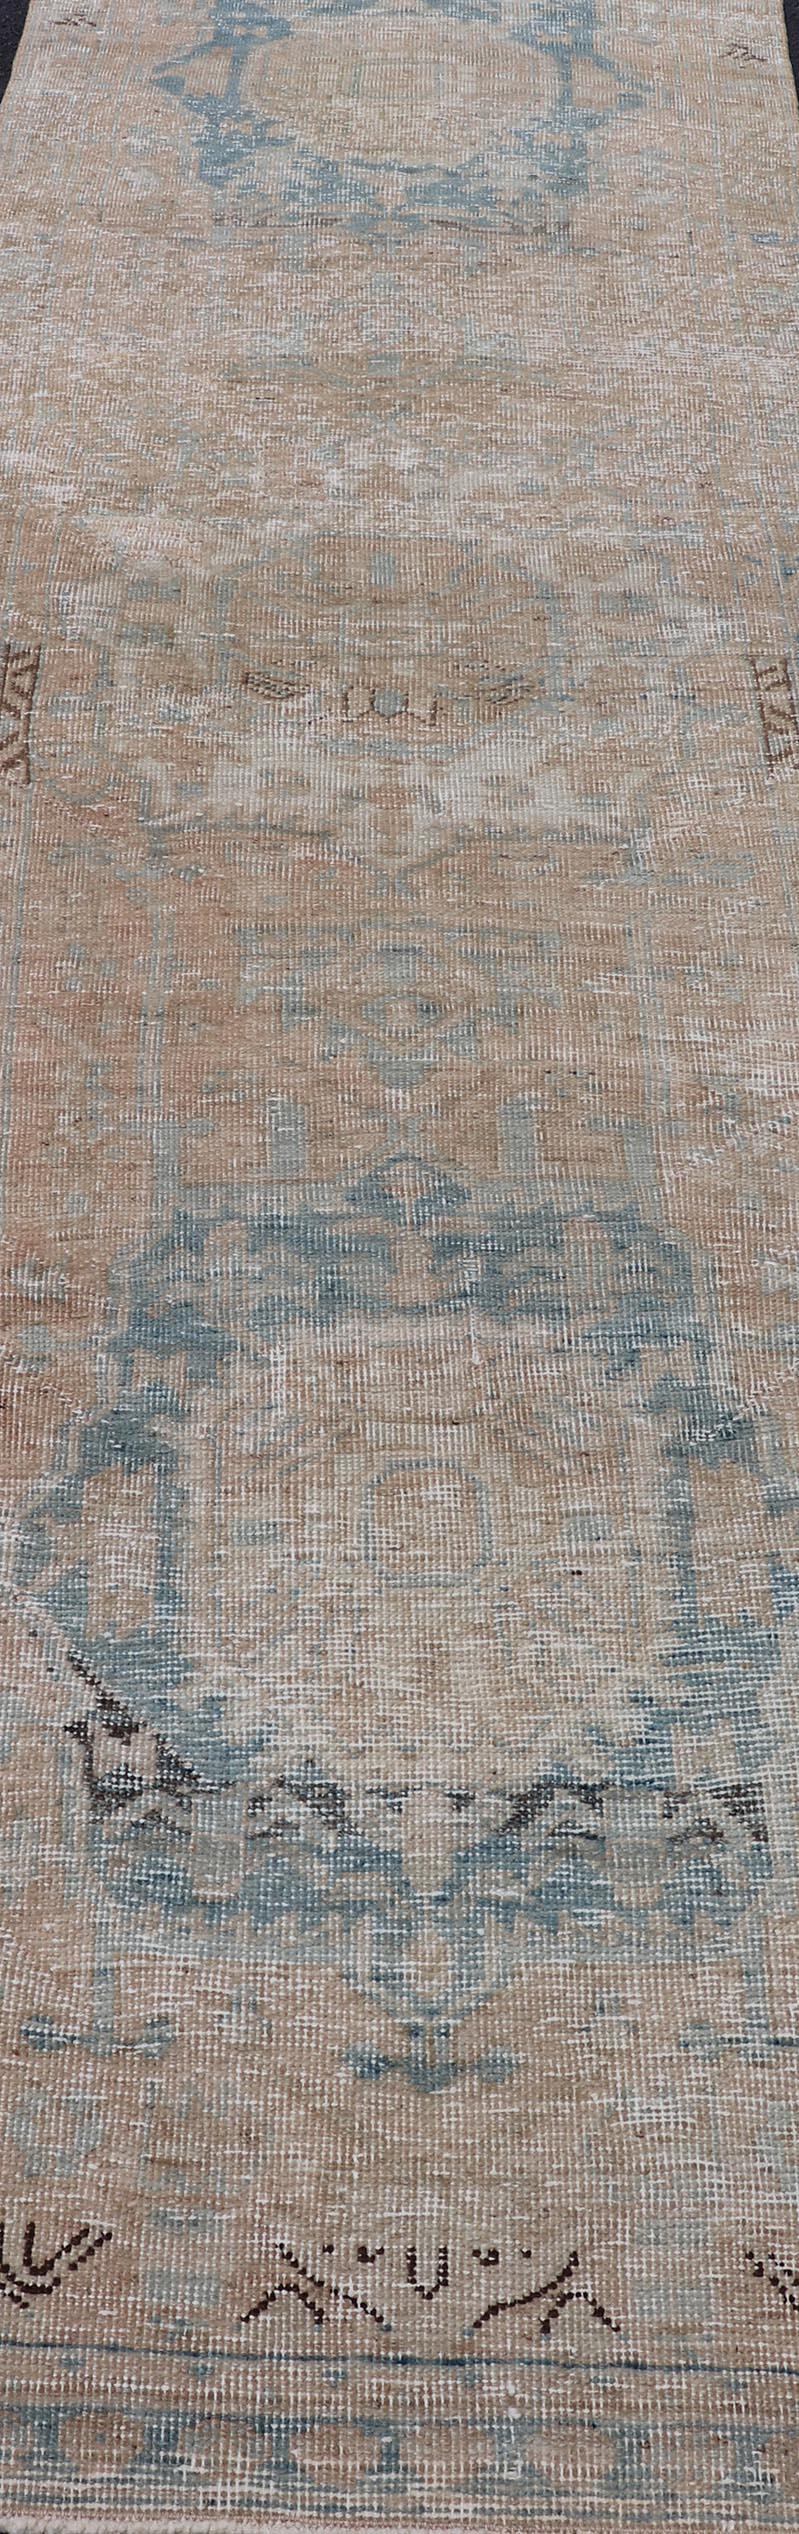 Vintage Persian Heriz Runner with Medallions in Earthy Tones and Light Blue For Sale 1